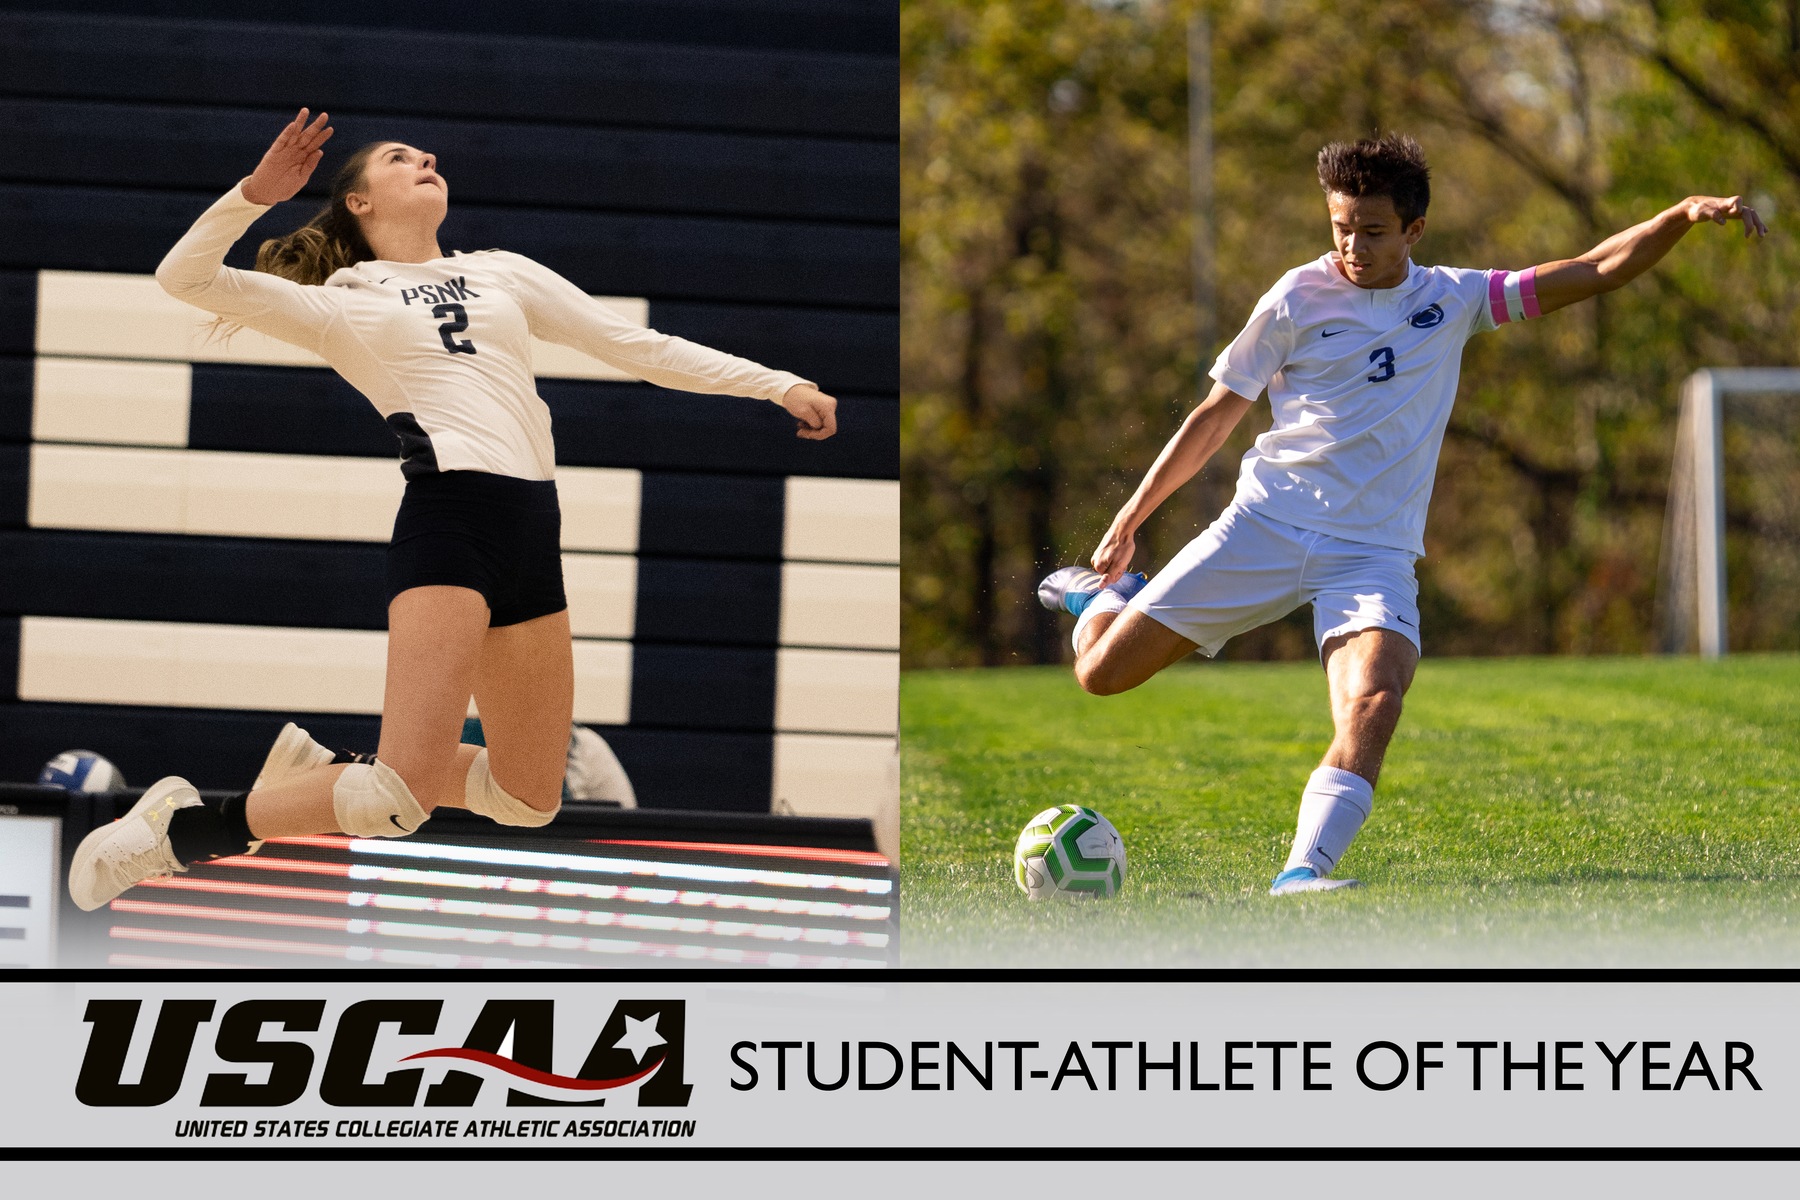 Kaylea Flick and Ben Midlik named USCAA Student-Athletes of the Year